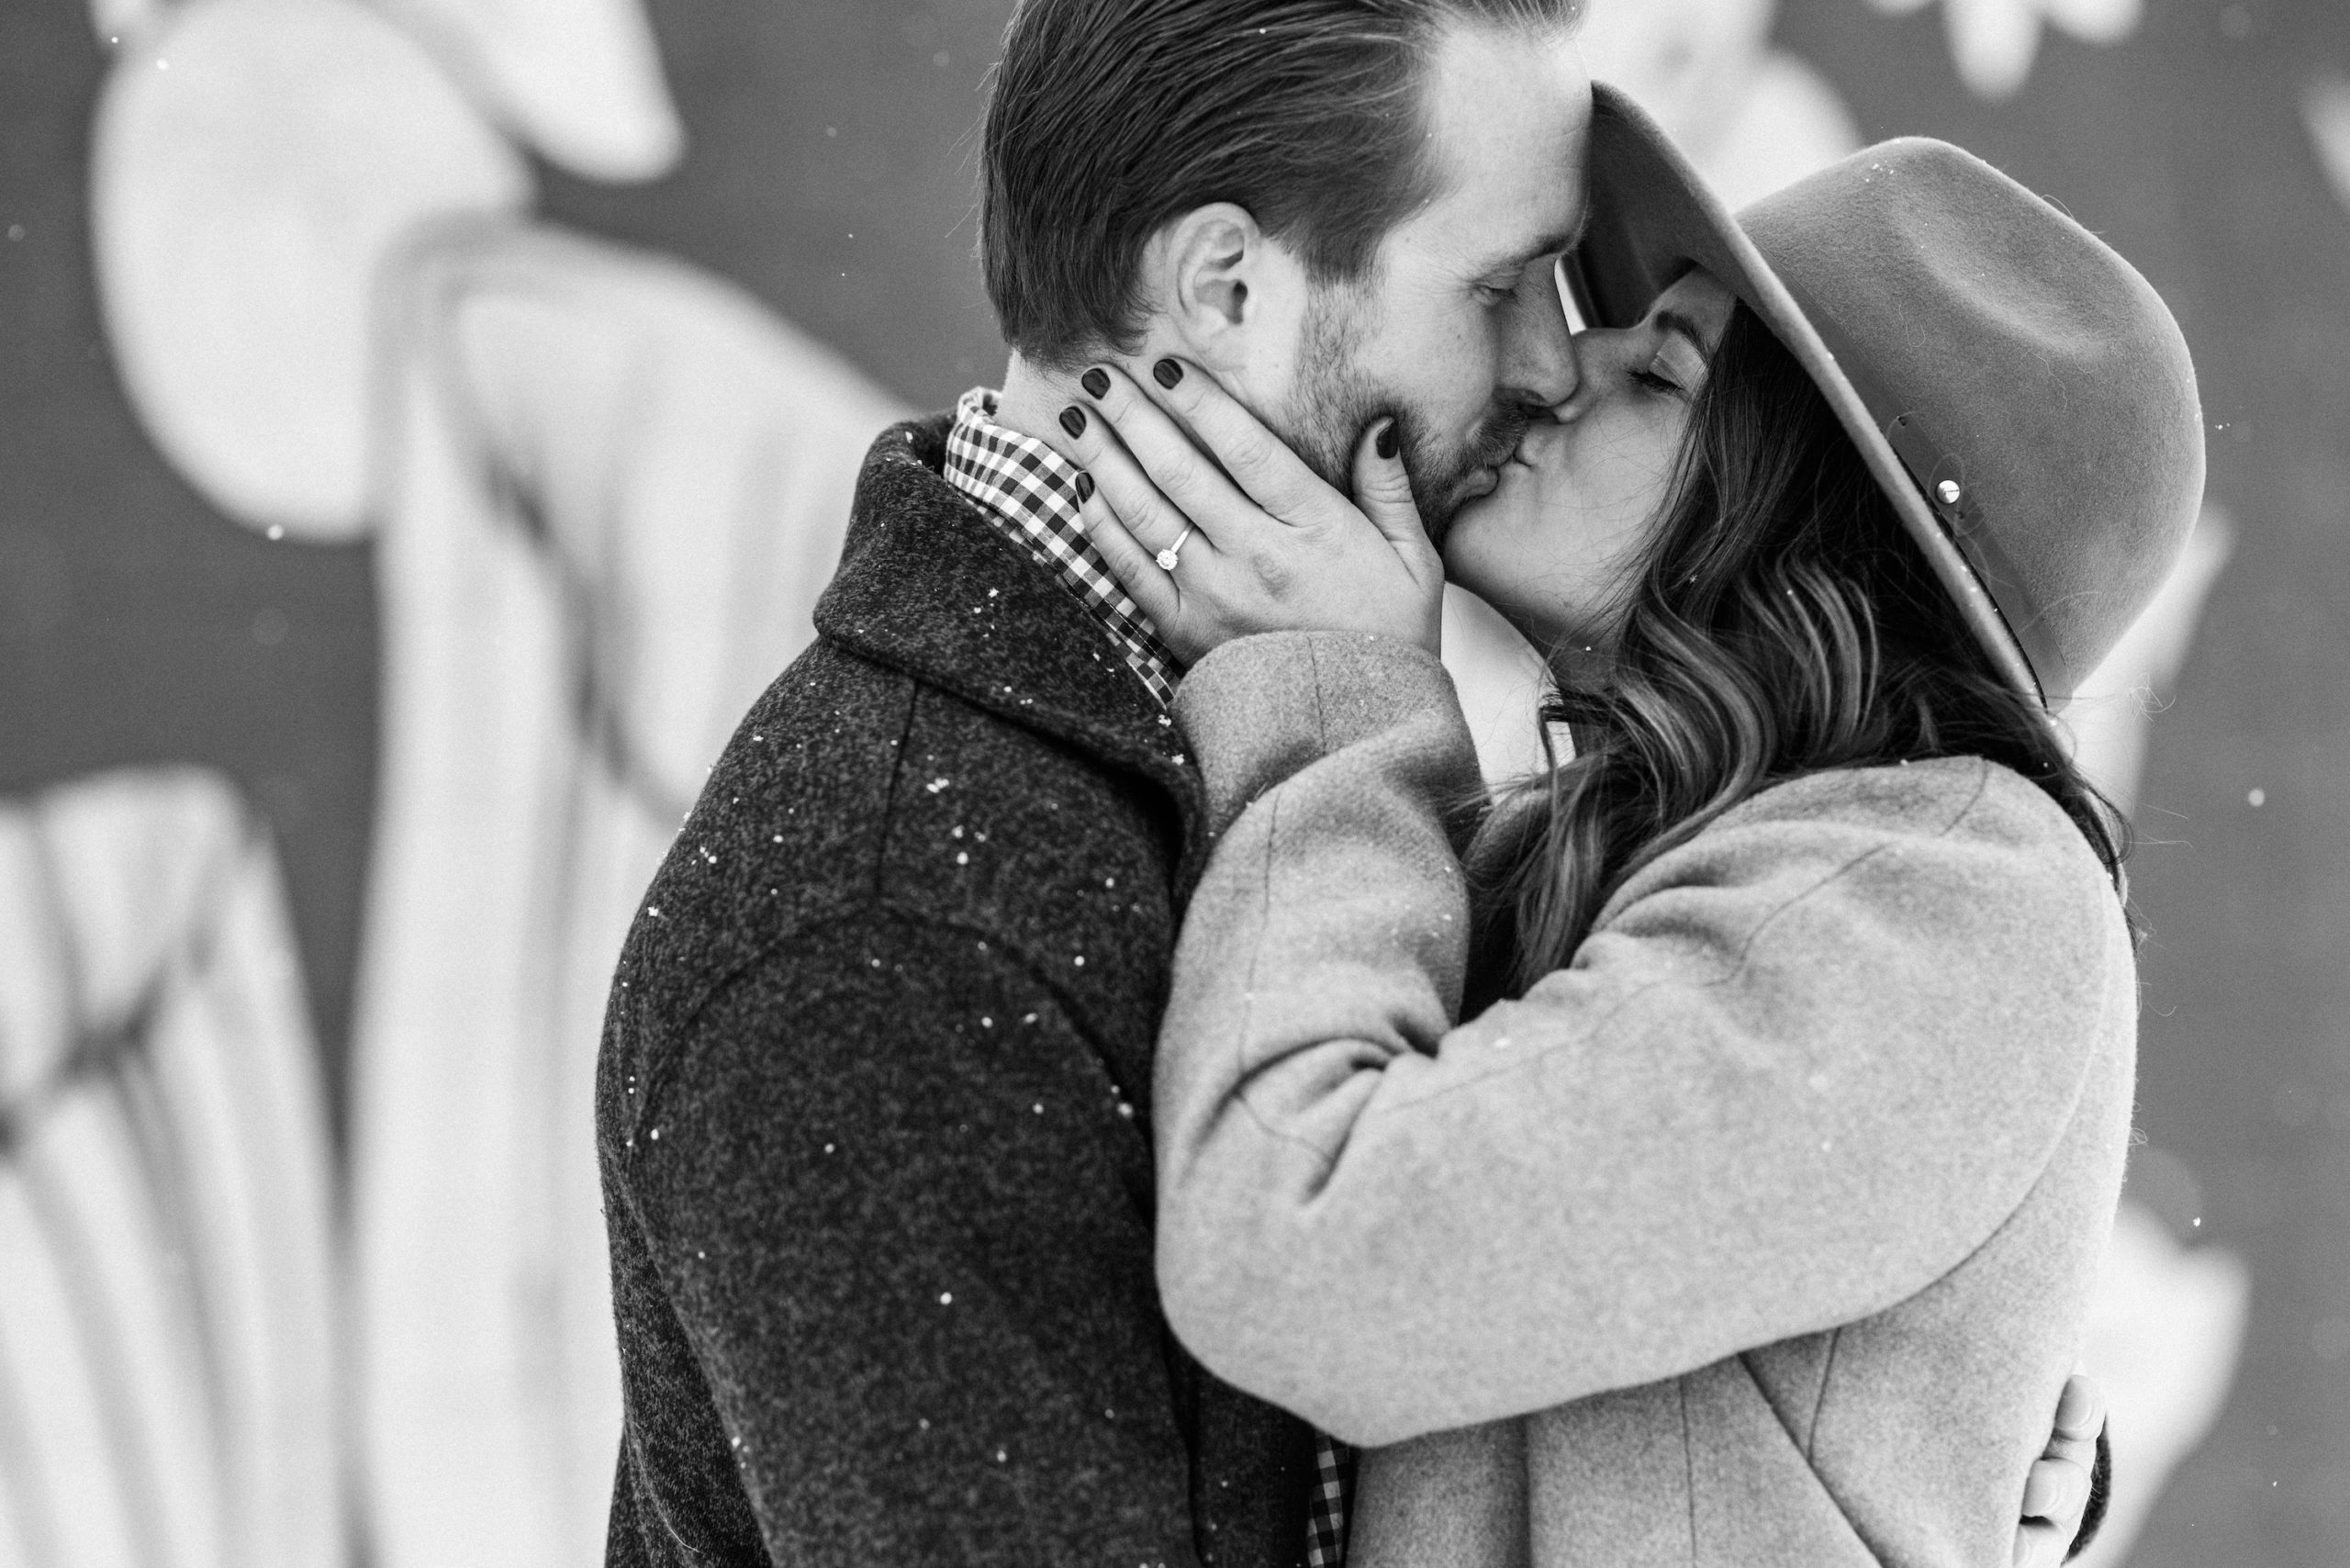 winter engagement, winter engagement photos, winter engagement photography, couple photos, couple photography, snowy winter engagements, snow engagement photos, engagement photo outfit inspiration, engagement ring